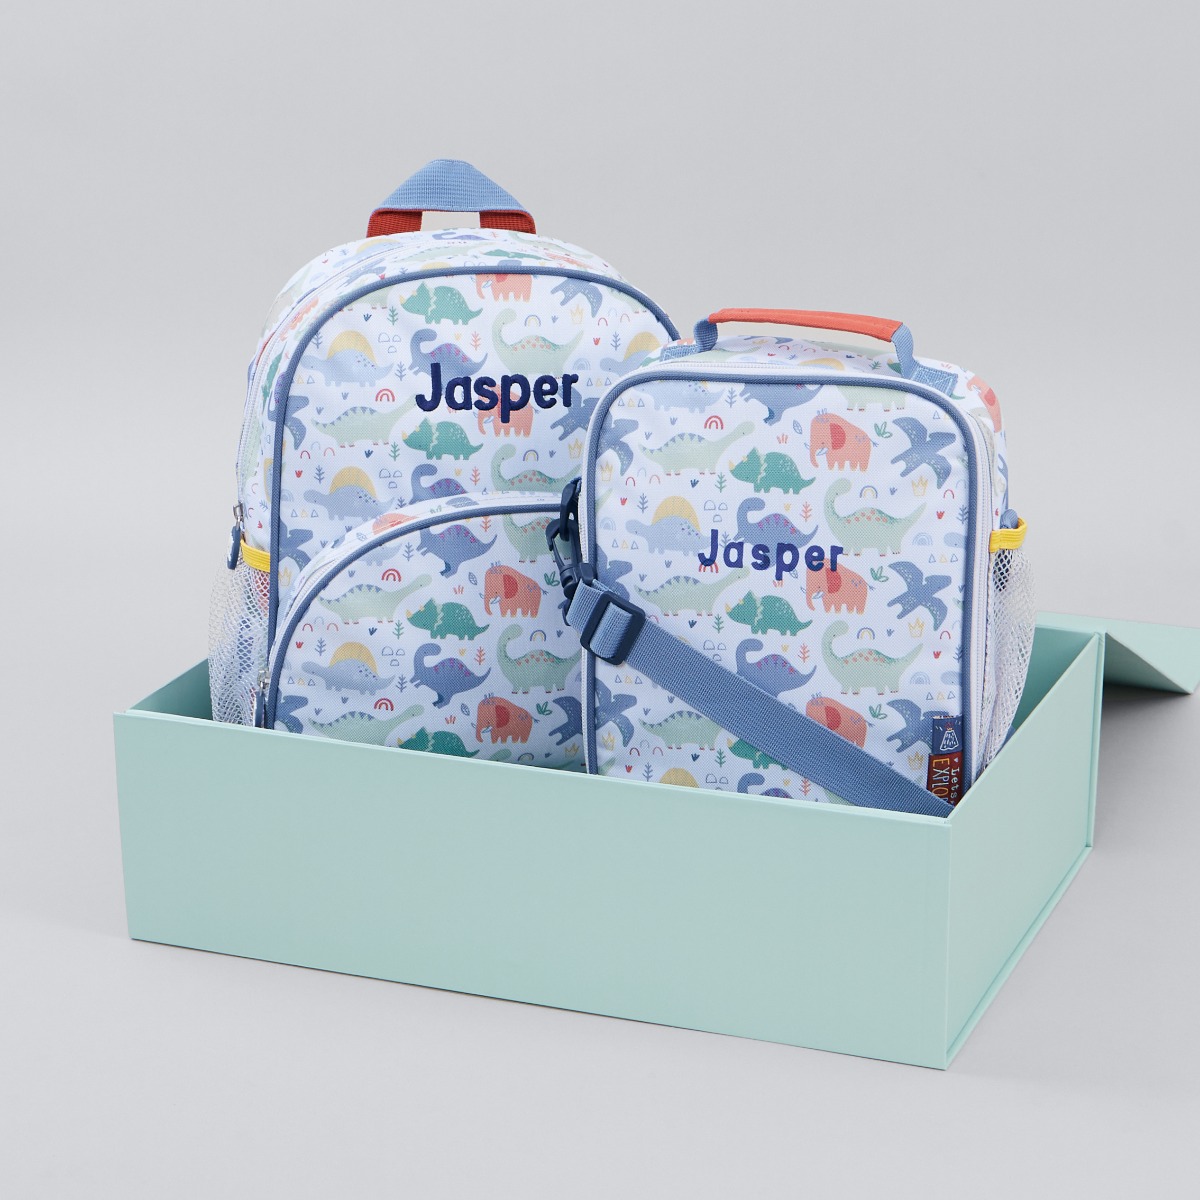 Personalised Jolly Jurassic Backpack and Lunchbag Gift Set